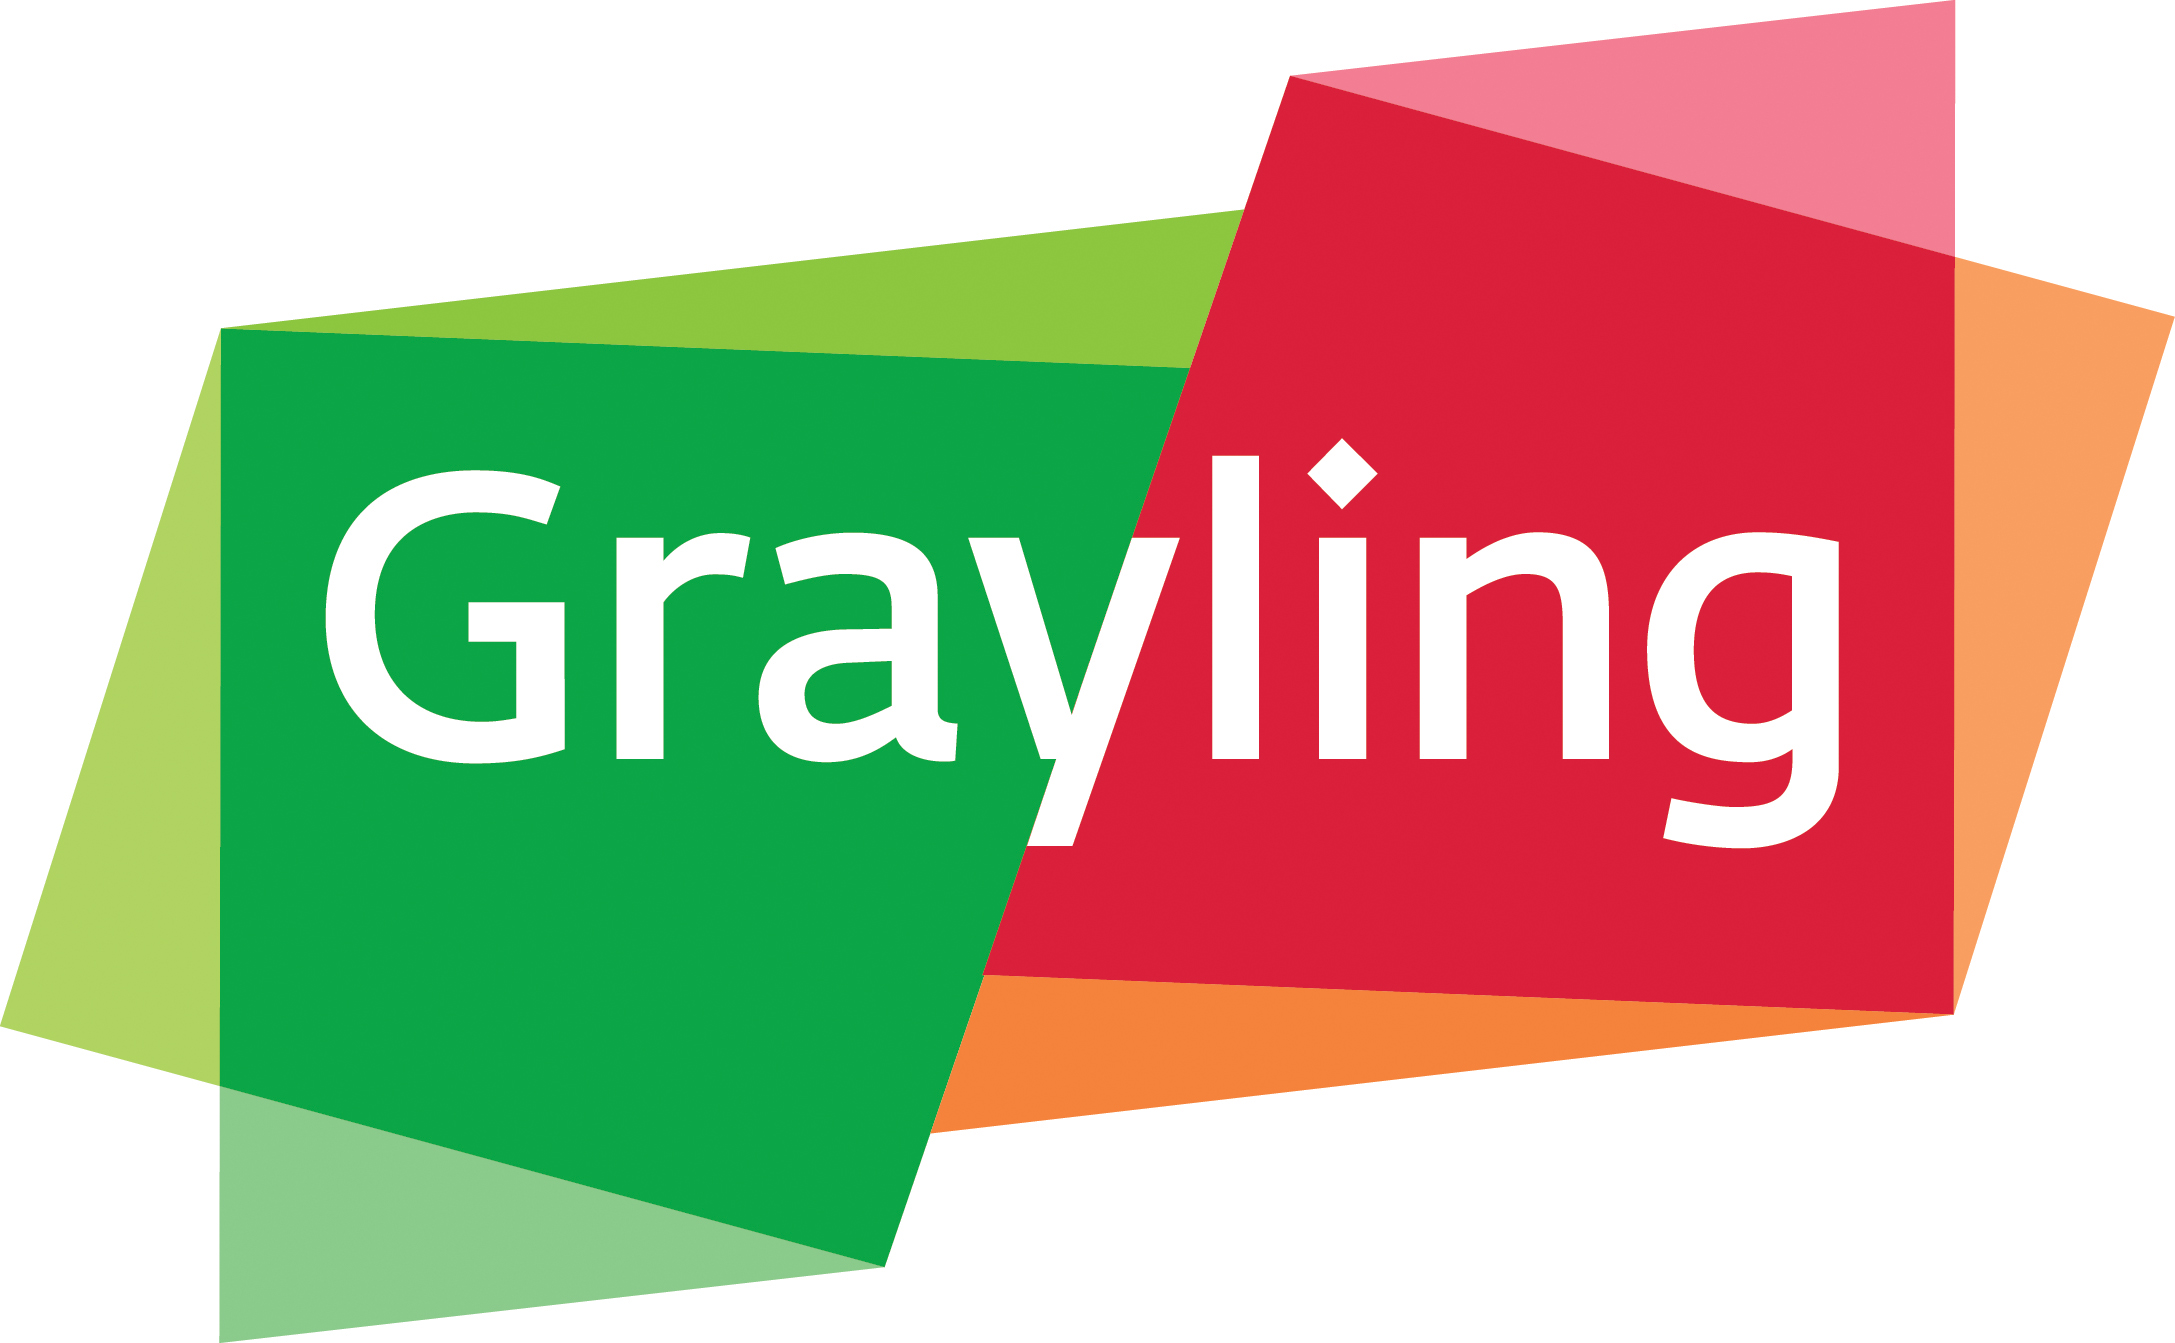  Top Entertainment Public Relations Agency Logo: Grayling